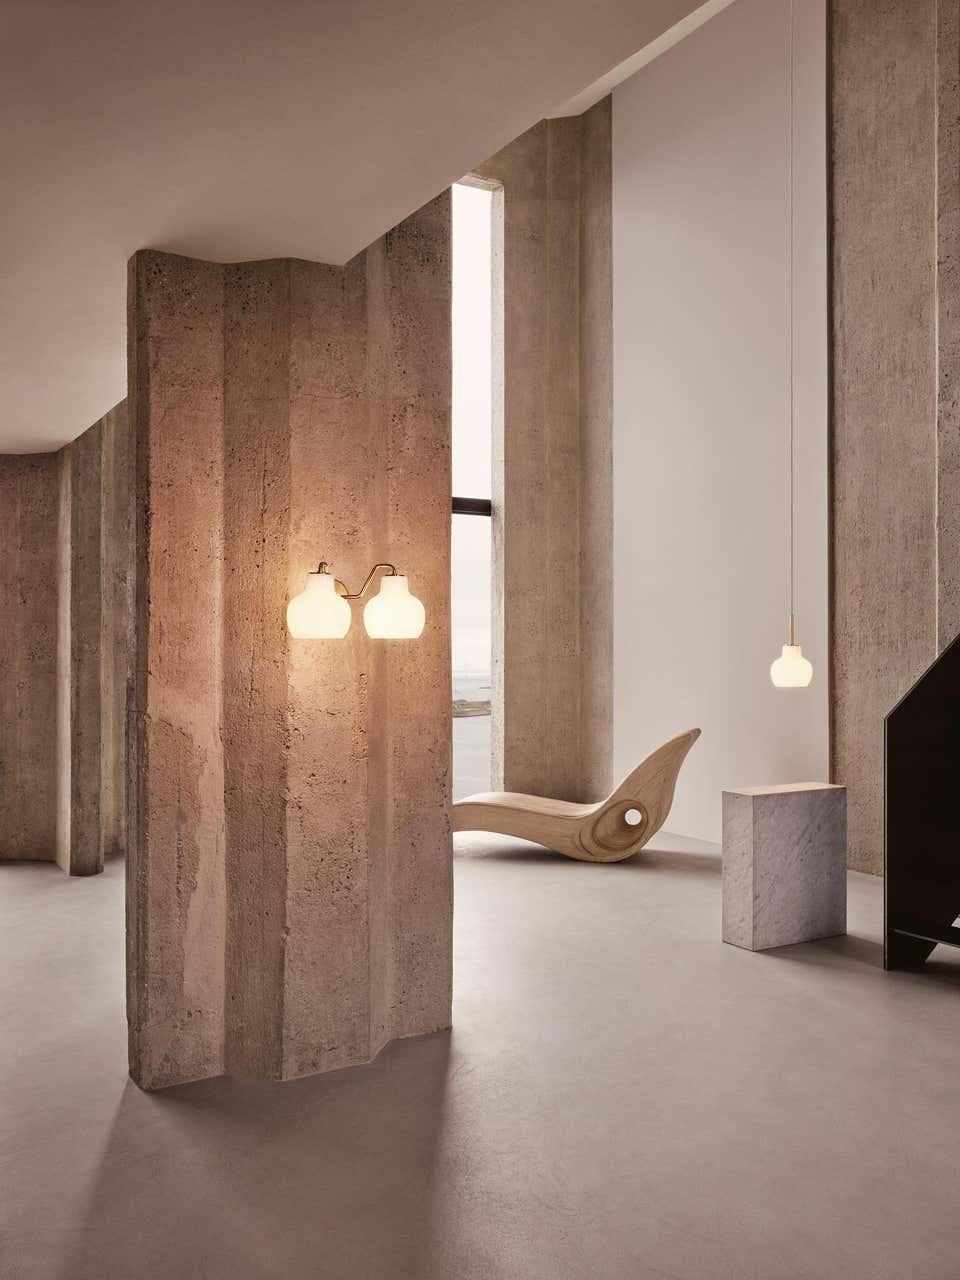 Louis Poulsen, wall lamp crown 2 by Vilhelm Lauritzen
Measures: Width 425 x height 233 x length 305(mm), 2.8 kg
2 Shades. Material: Shades: Mouth-blown, 3-layered, polished opal glass. Rear house and arm: Satin polished brass, untreated. Please